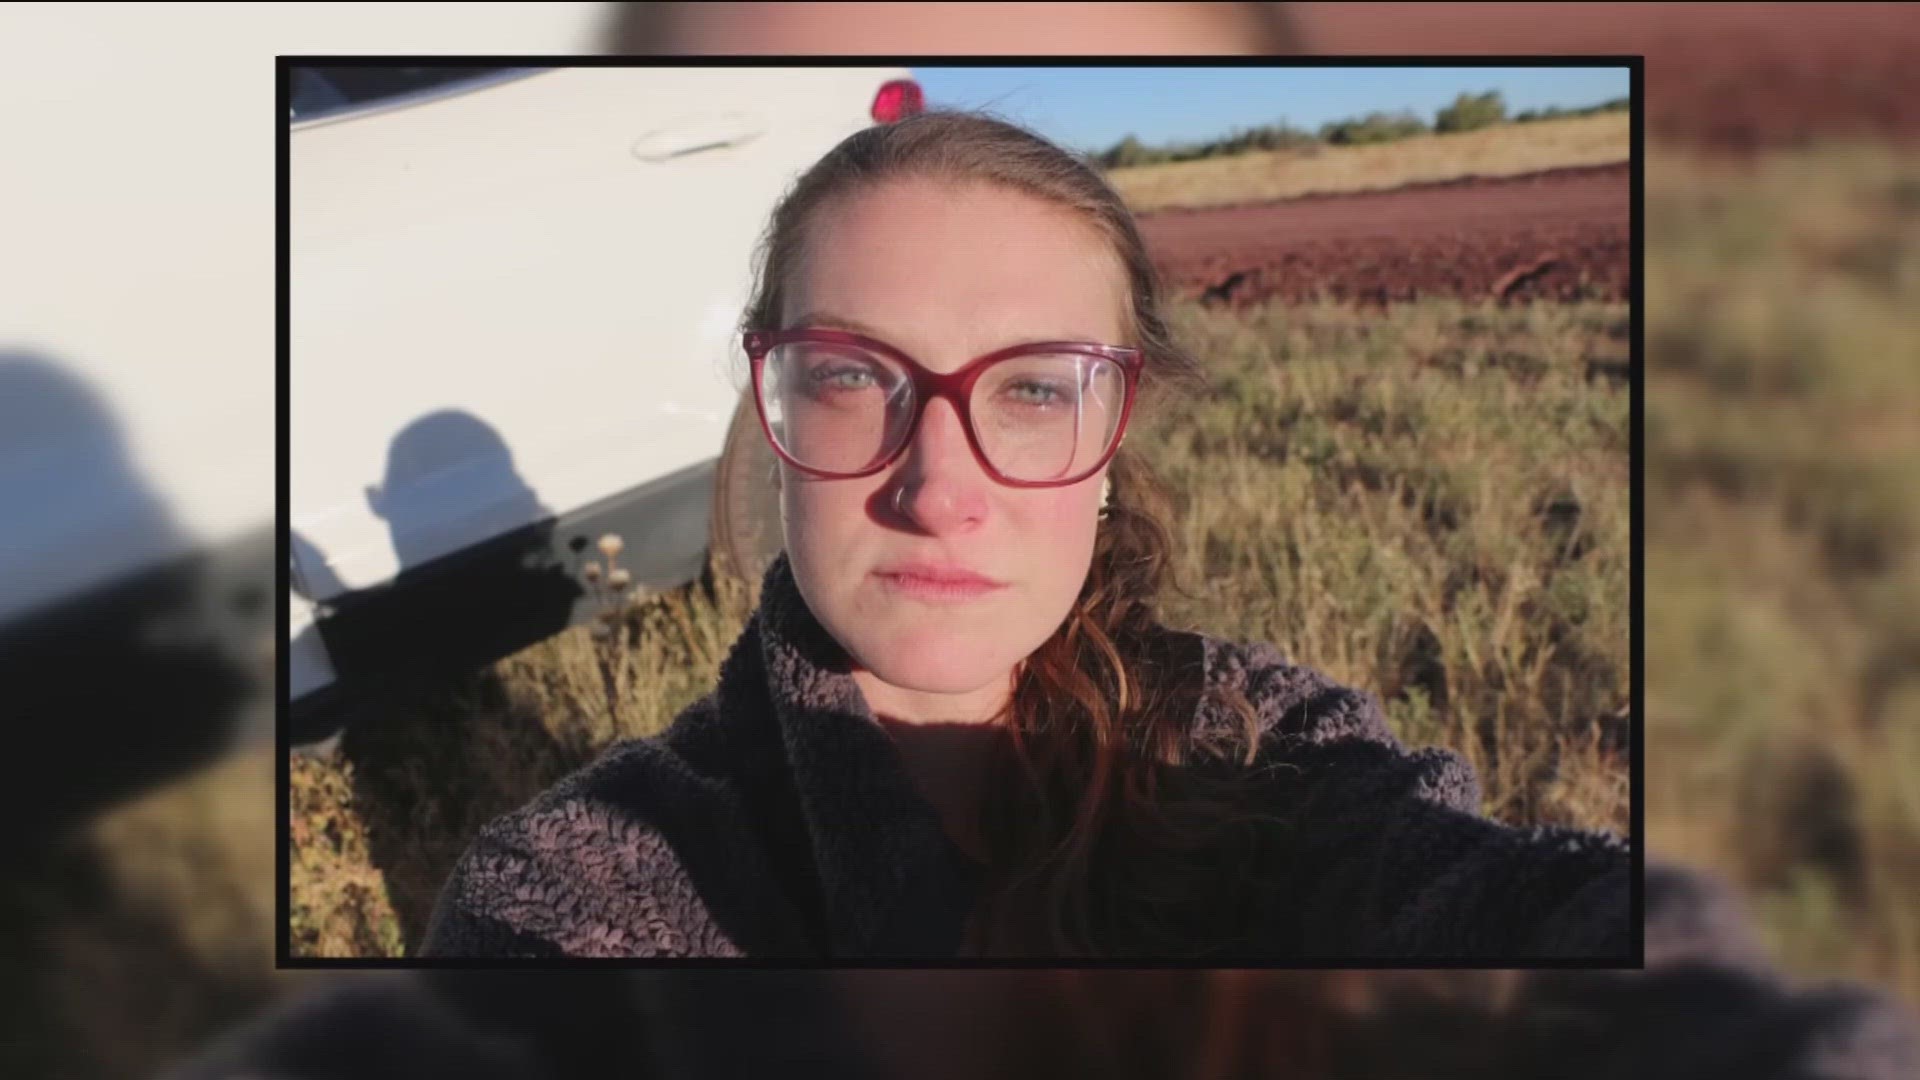 Coconino County Sheriff's deputies were called to Road 6, a remote dirt road west of Flagstaff near Ashfork, Arizona Oct. 5 and found her car abandoned.